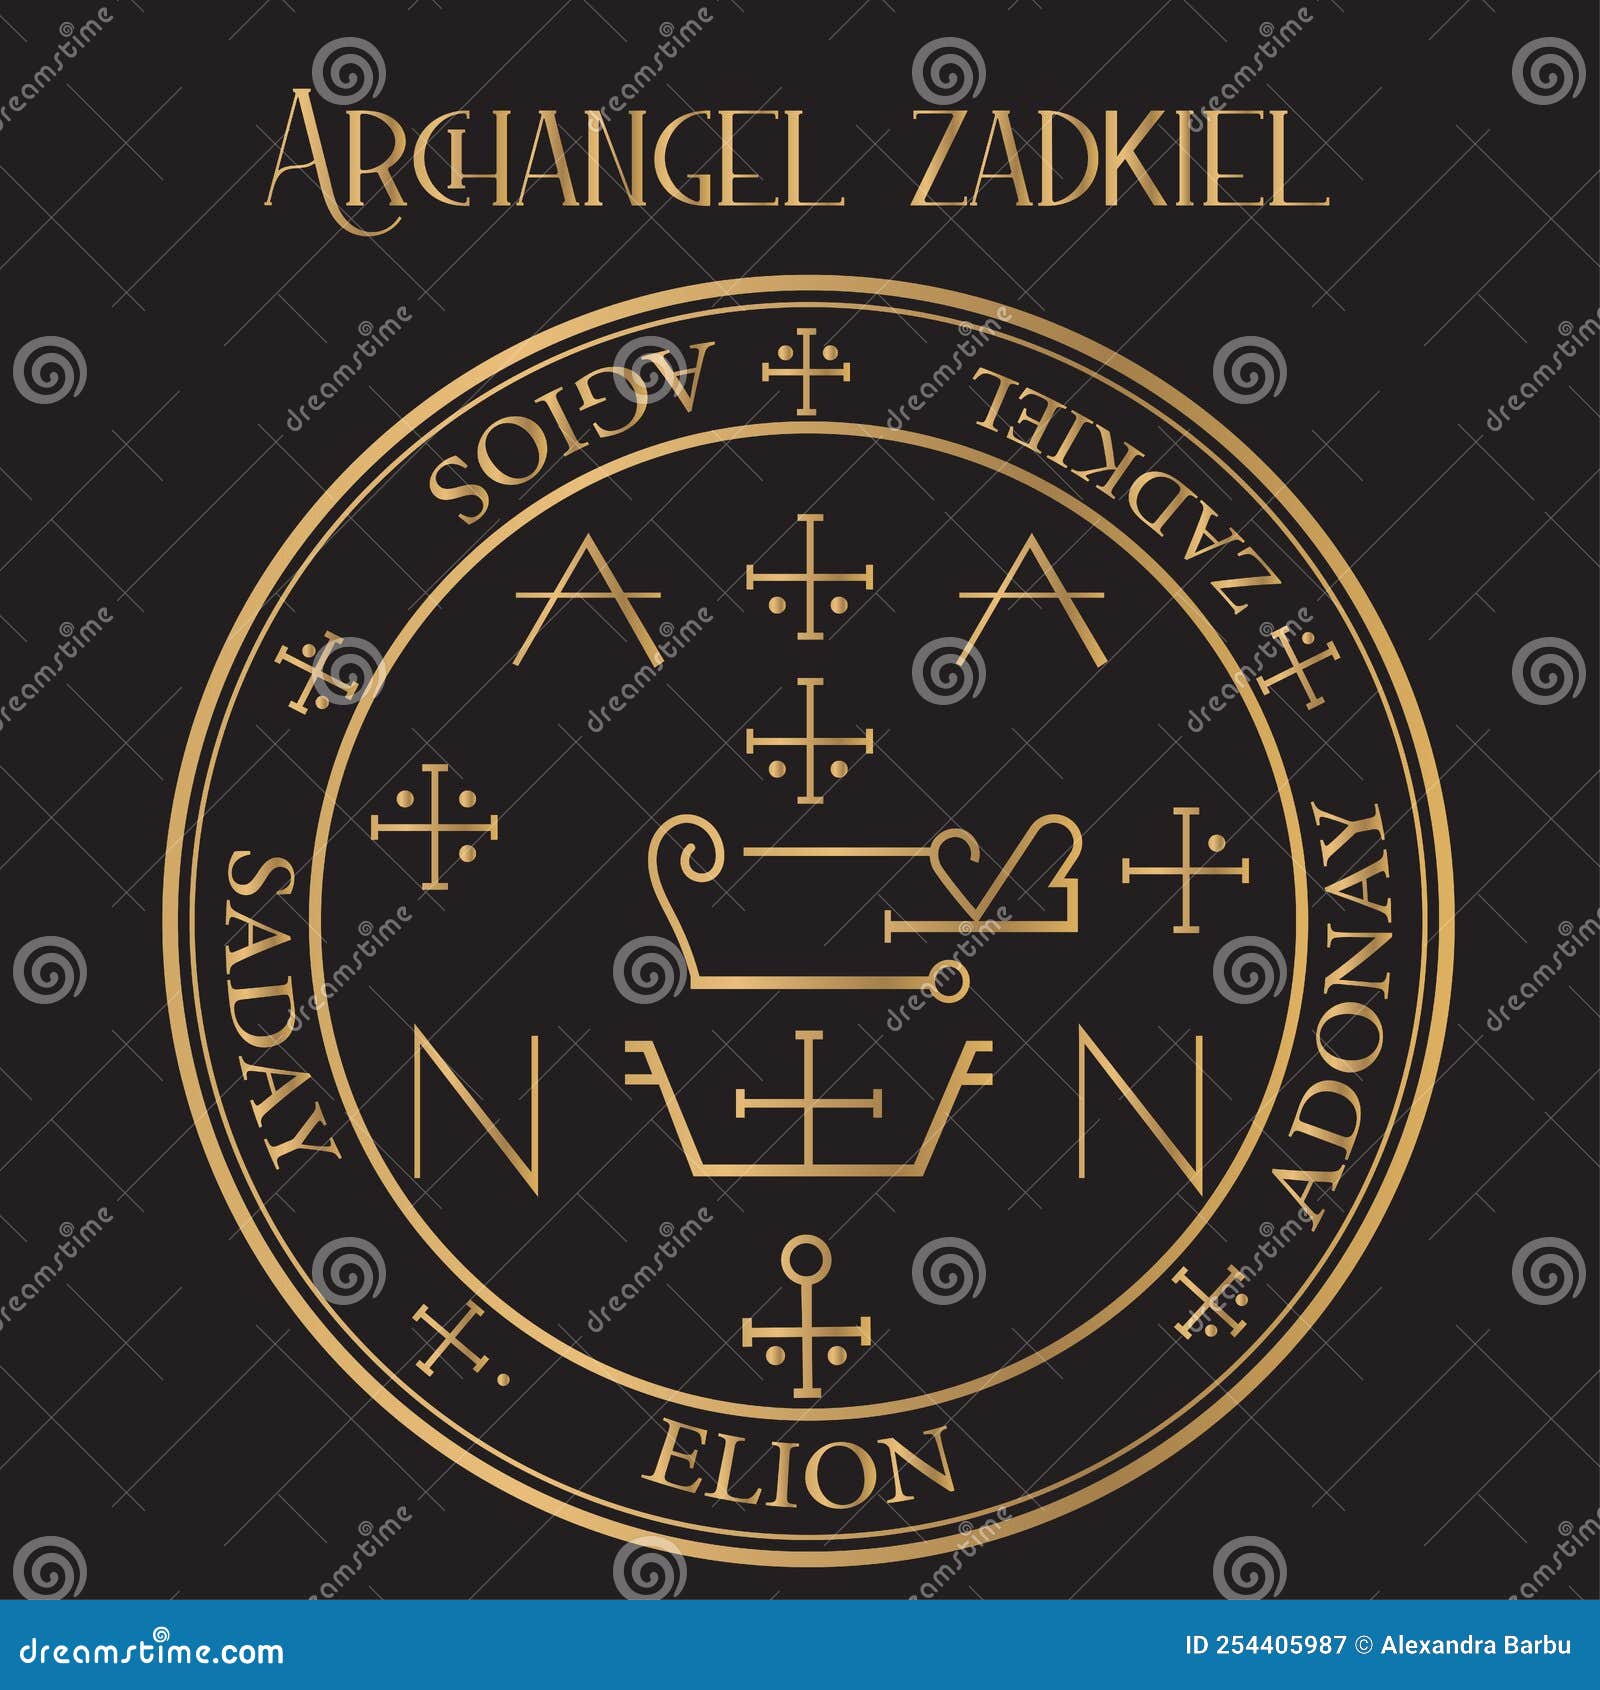 archangel zadkiel seal - `righteousness of god` or `grace of god` is the archangel of freedom, benevolence and mercy